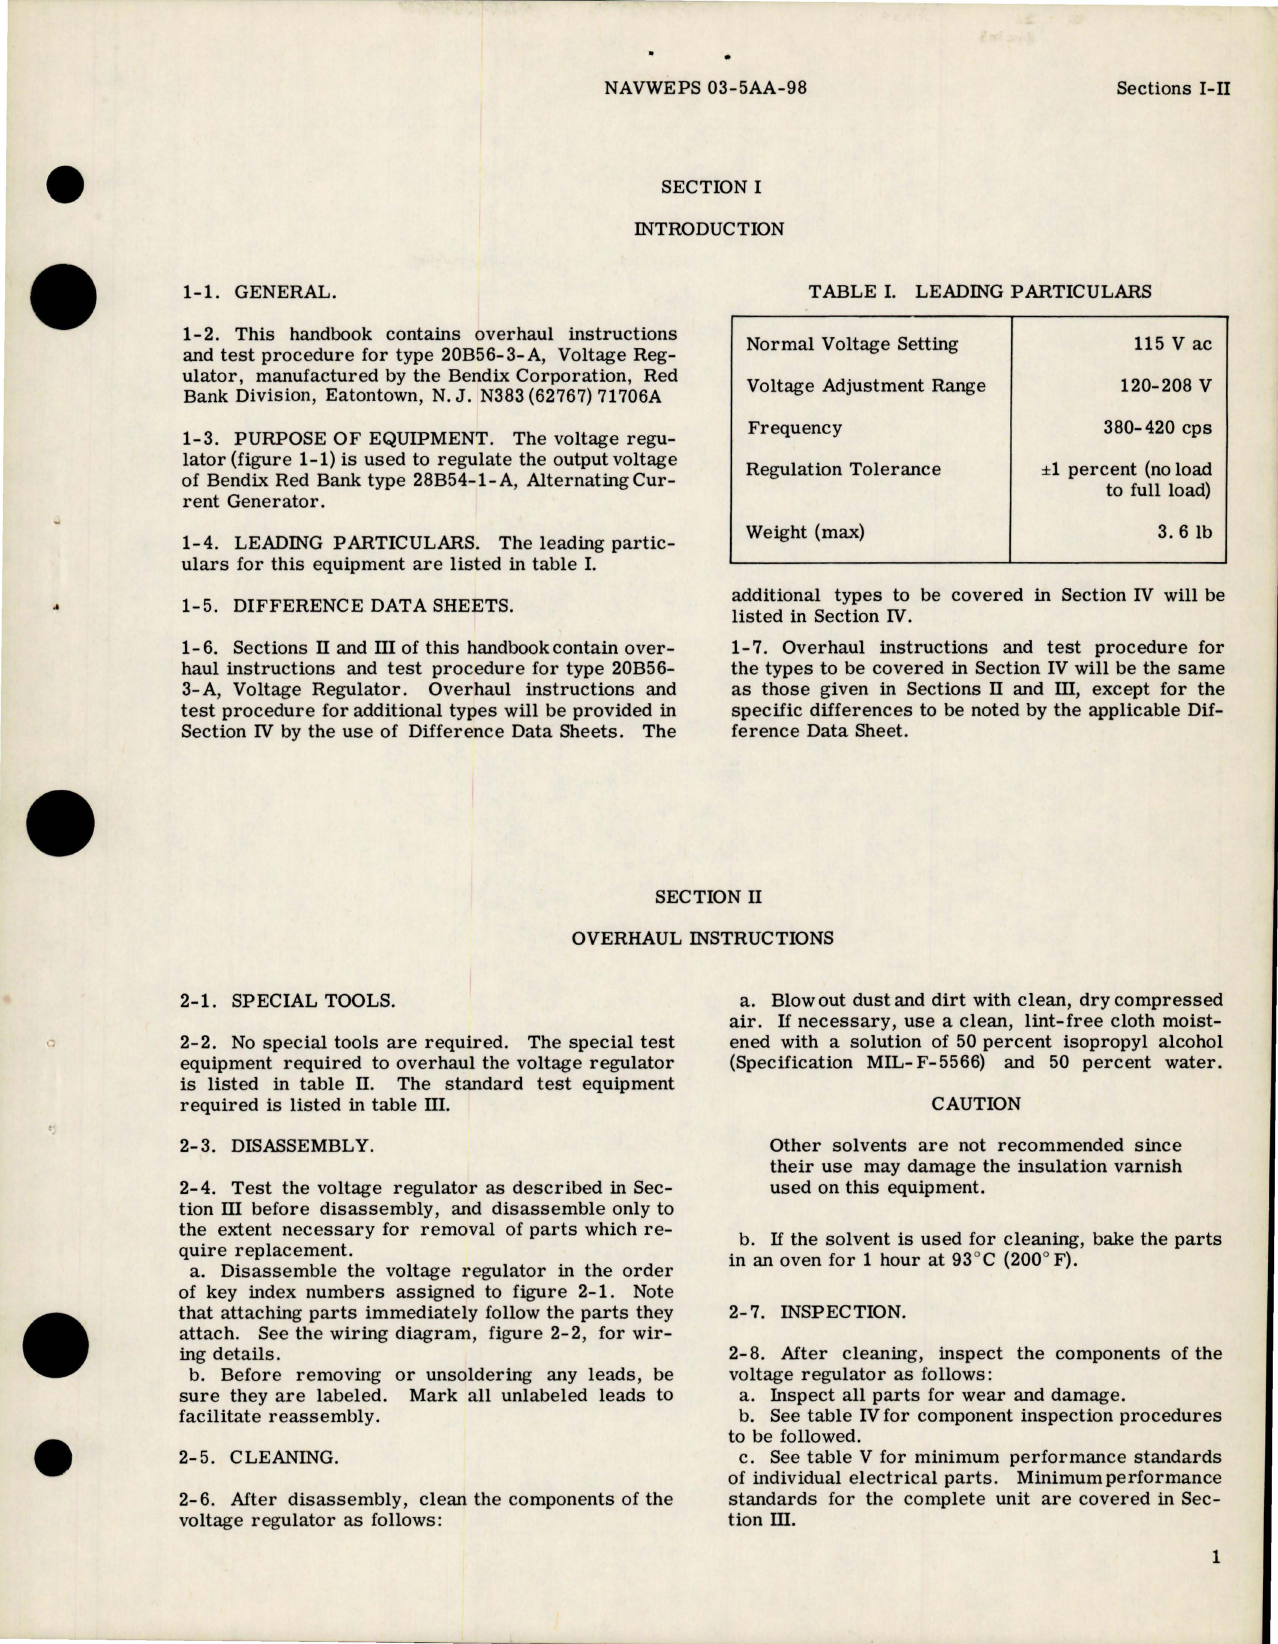 Sample page 5 from AirCorps Library document: Overhaul Instructions for Voltage Regulator - Type 20B56-3-A 